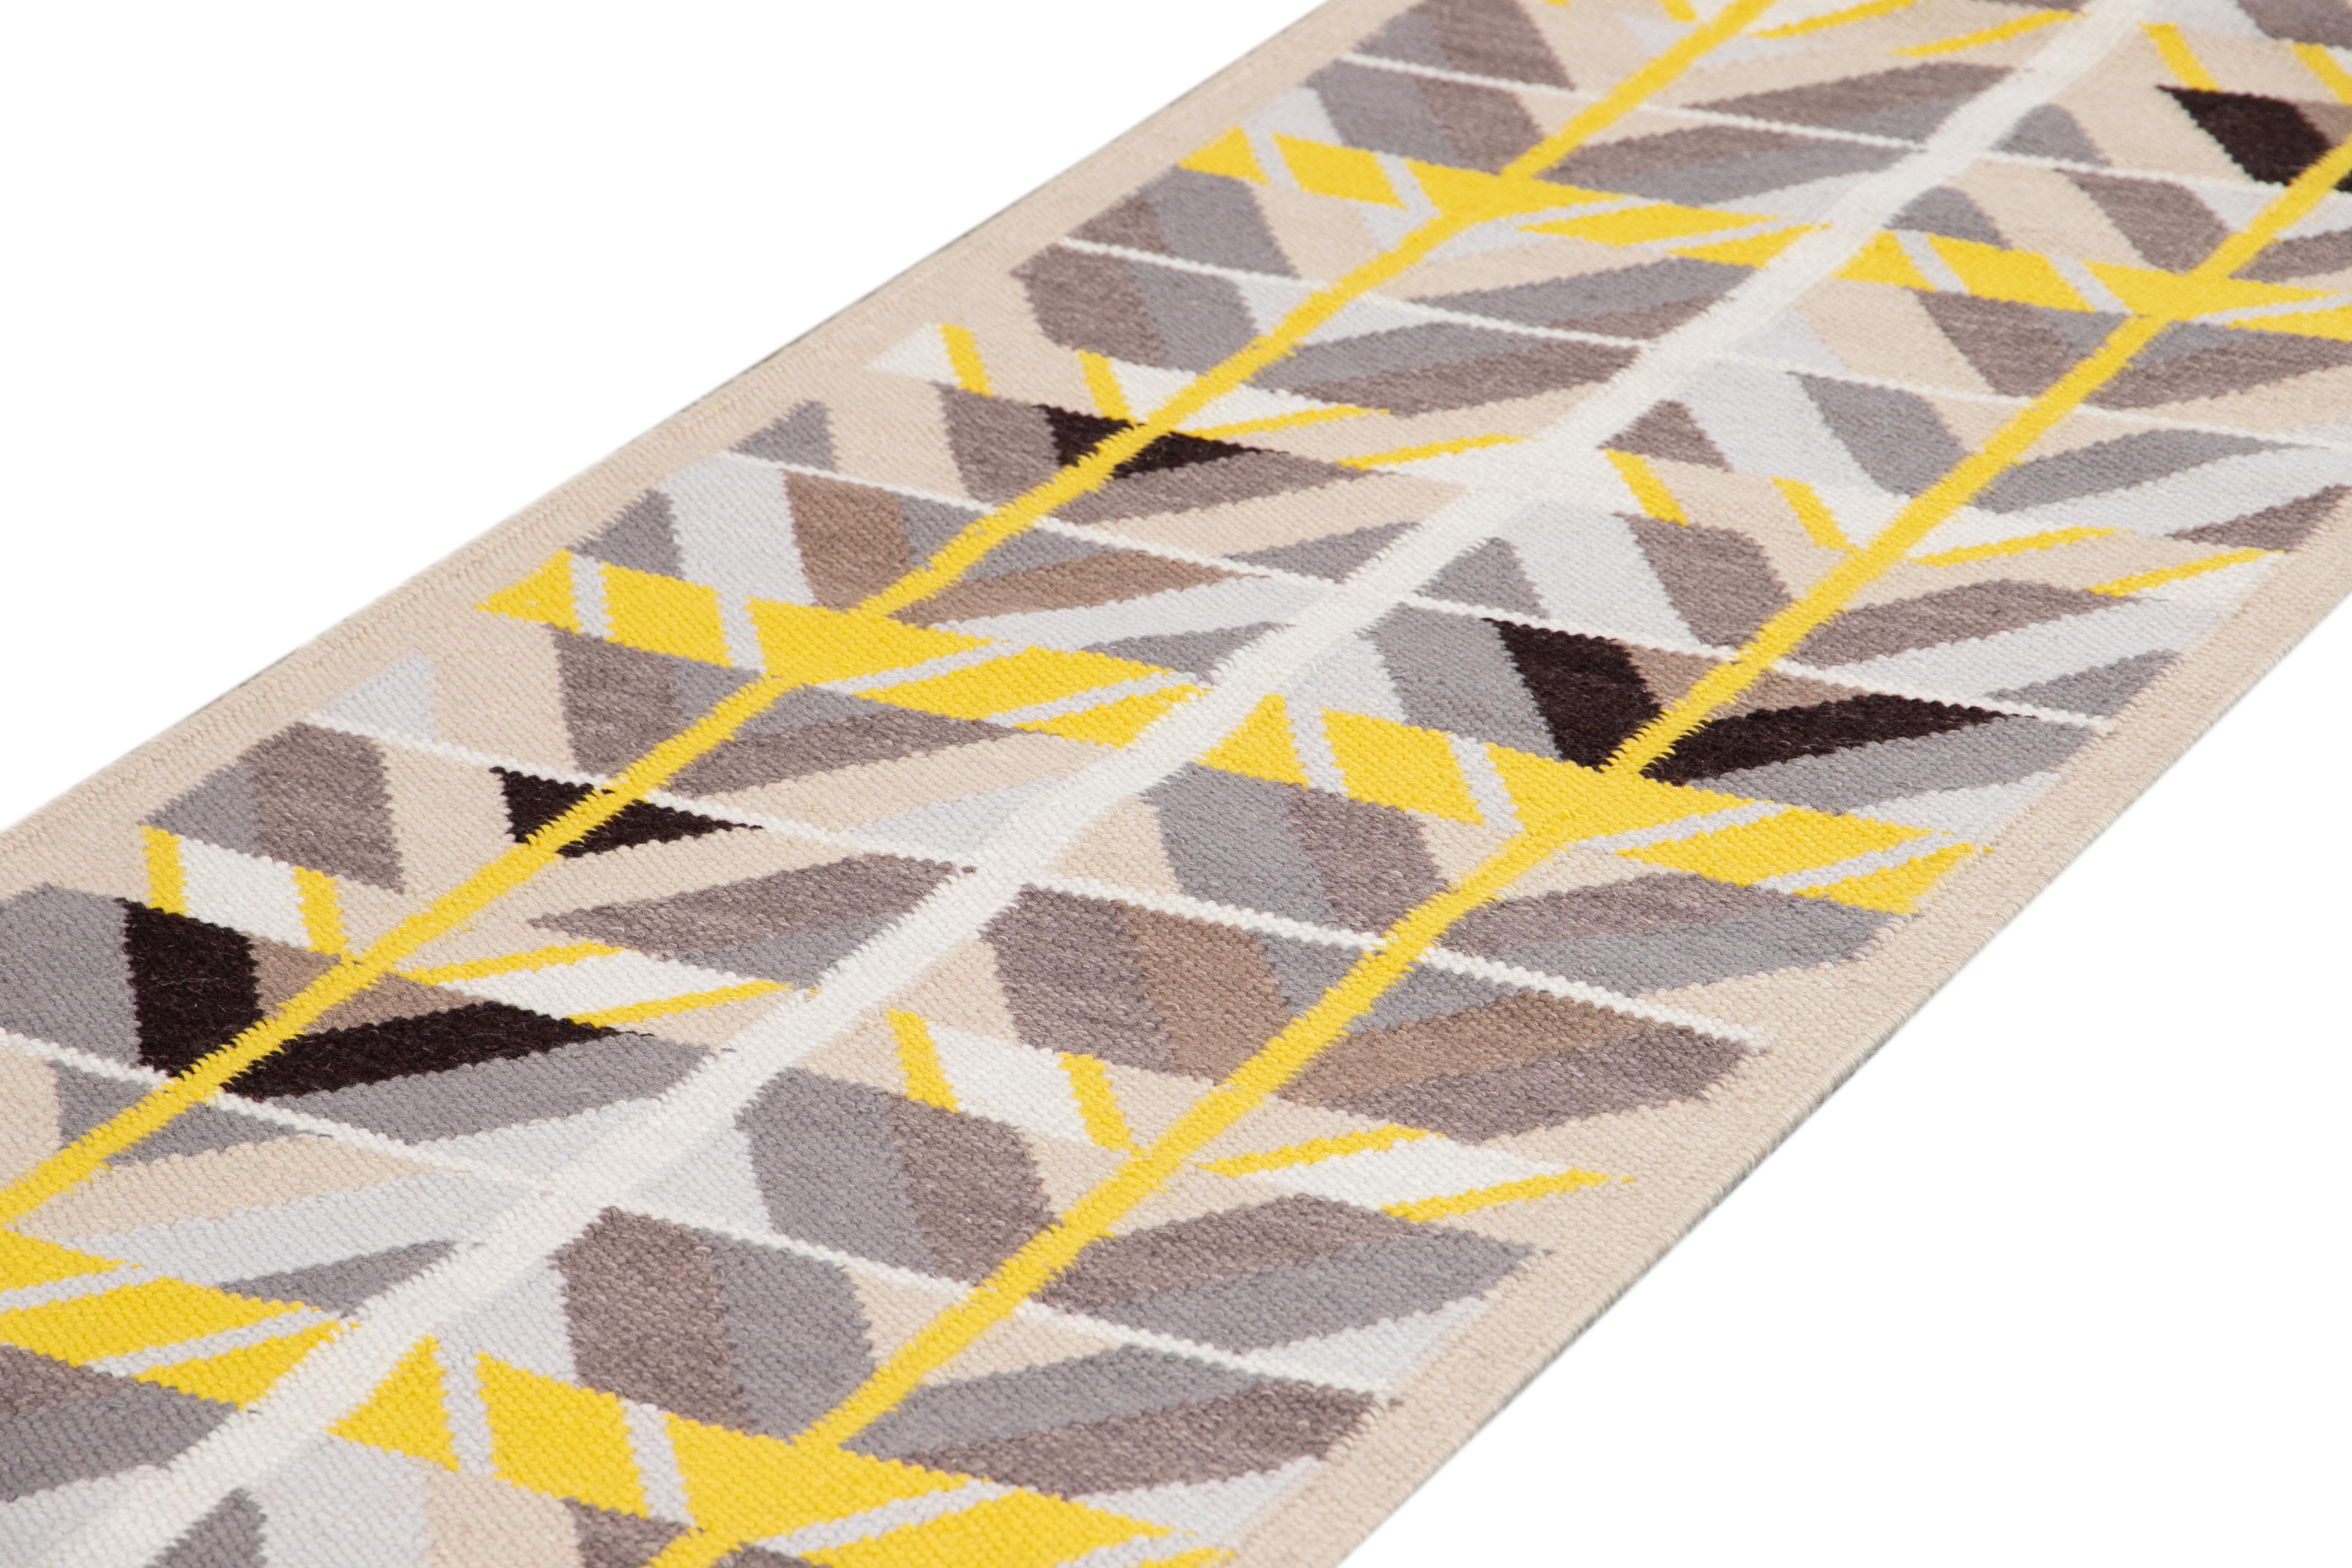 Beautiful contemporary Swedish style runner rug, hand knotted wool with a cream tan field, bright yellow and gray accents in an all-over Classic Scandinavian geometric design.
This rug measures 3' x 18' 3